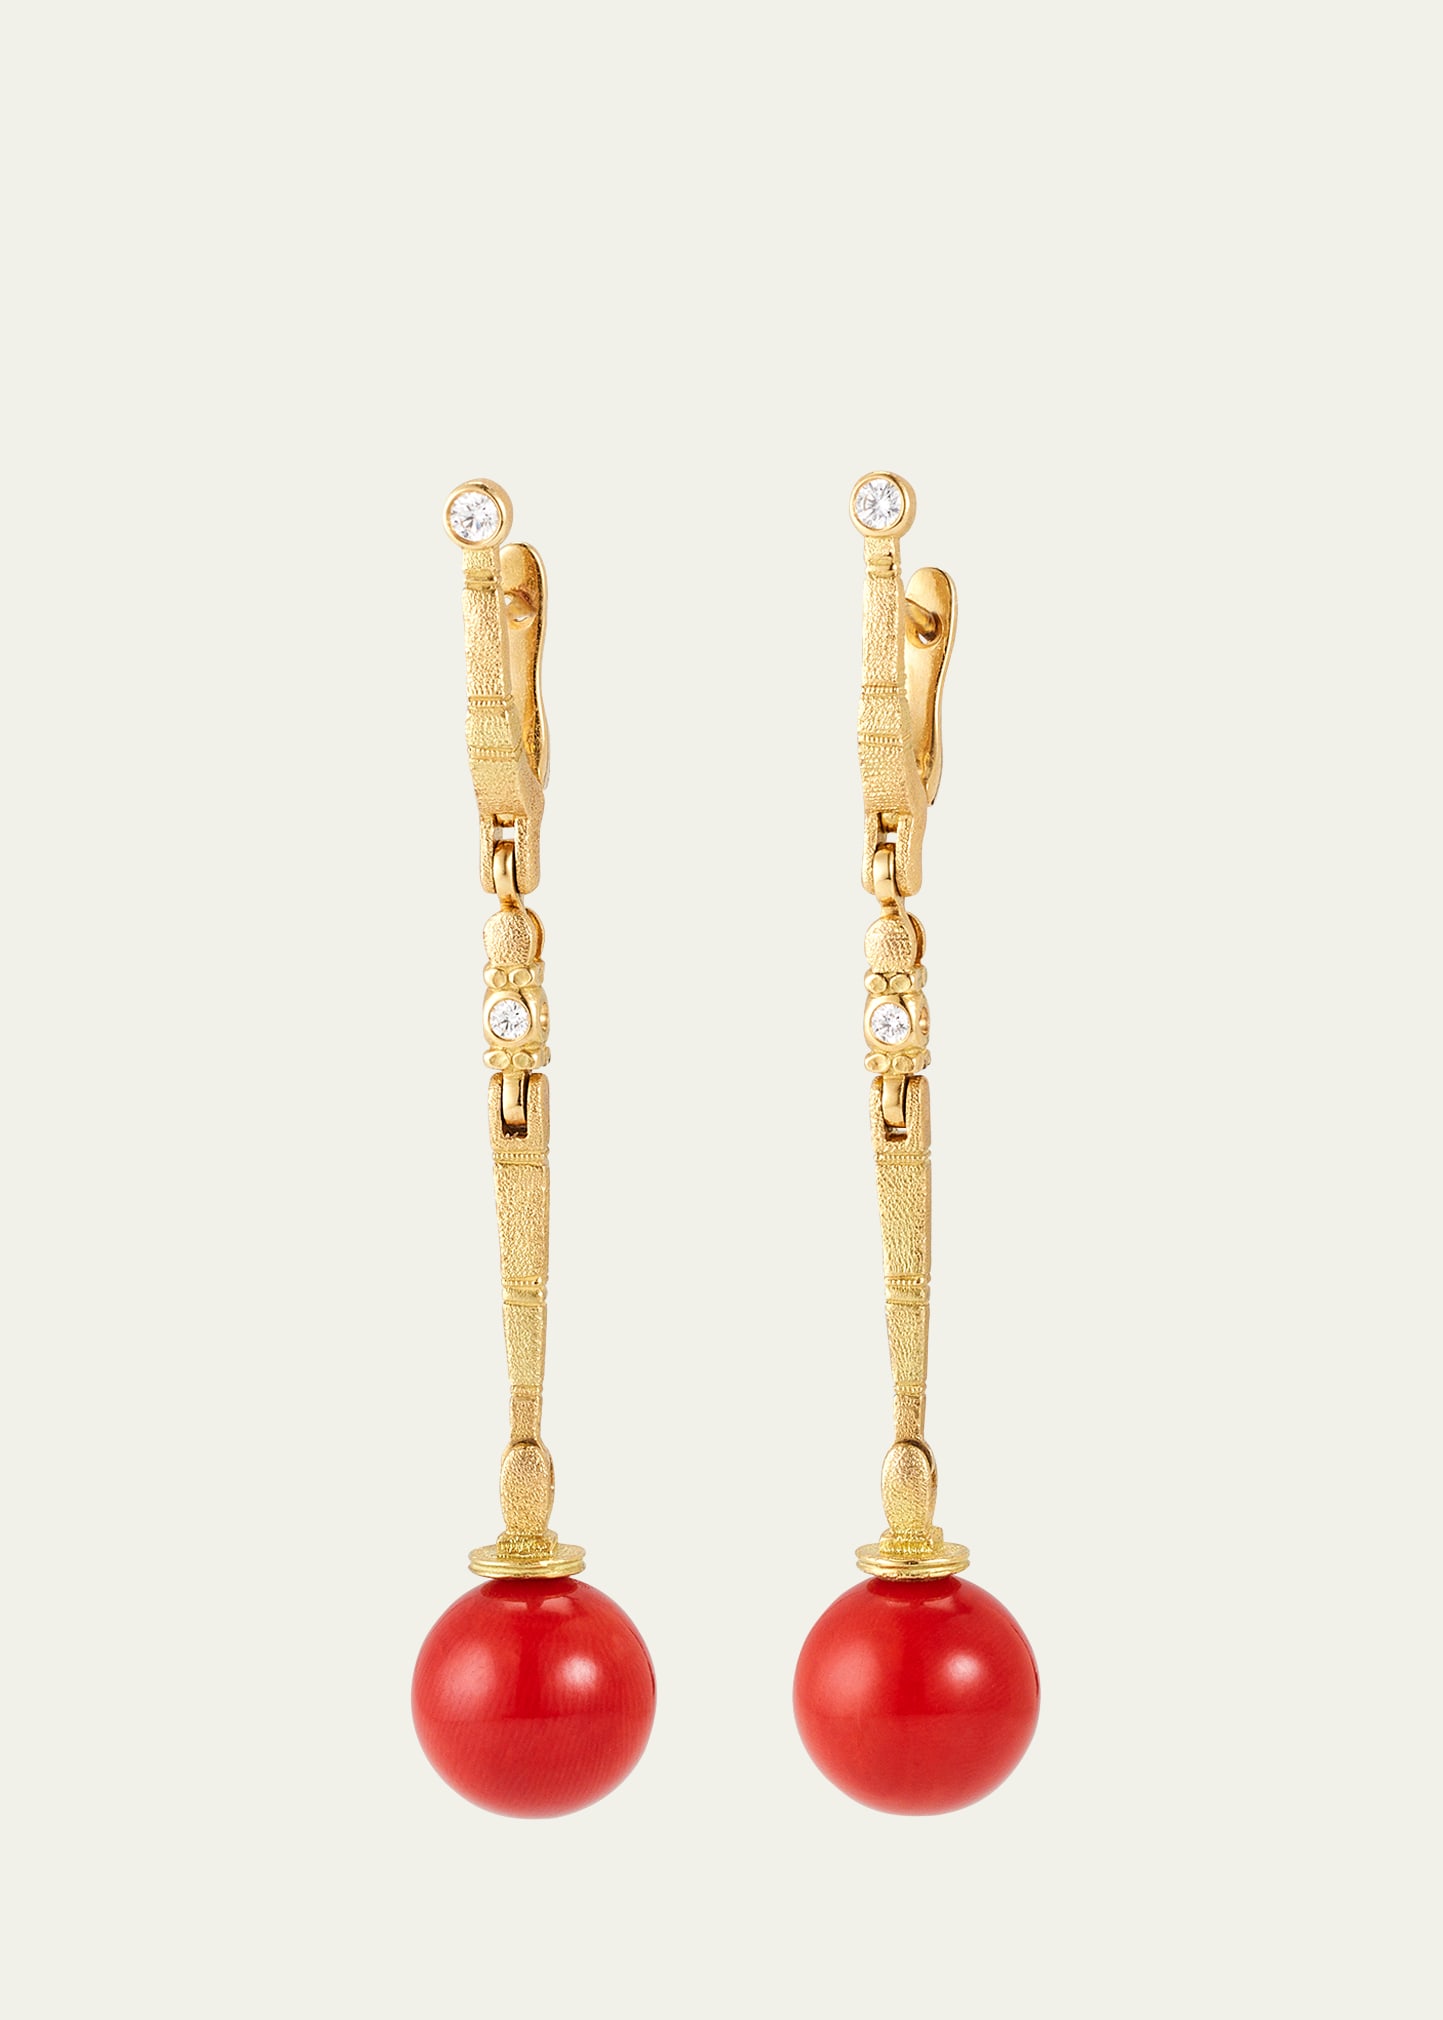 18K Yellow Gold Sticks and Stones Earrings with Diamonds and Coral